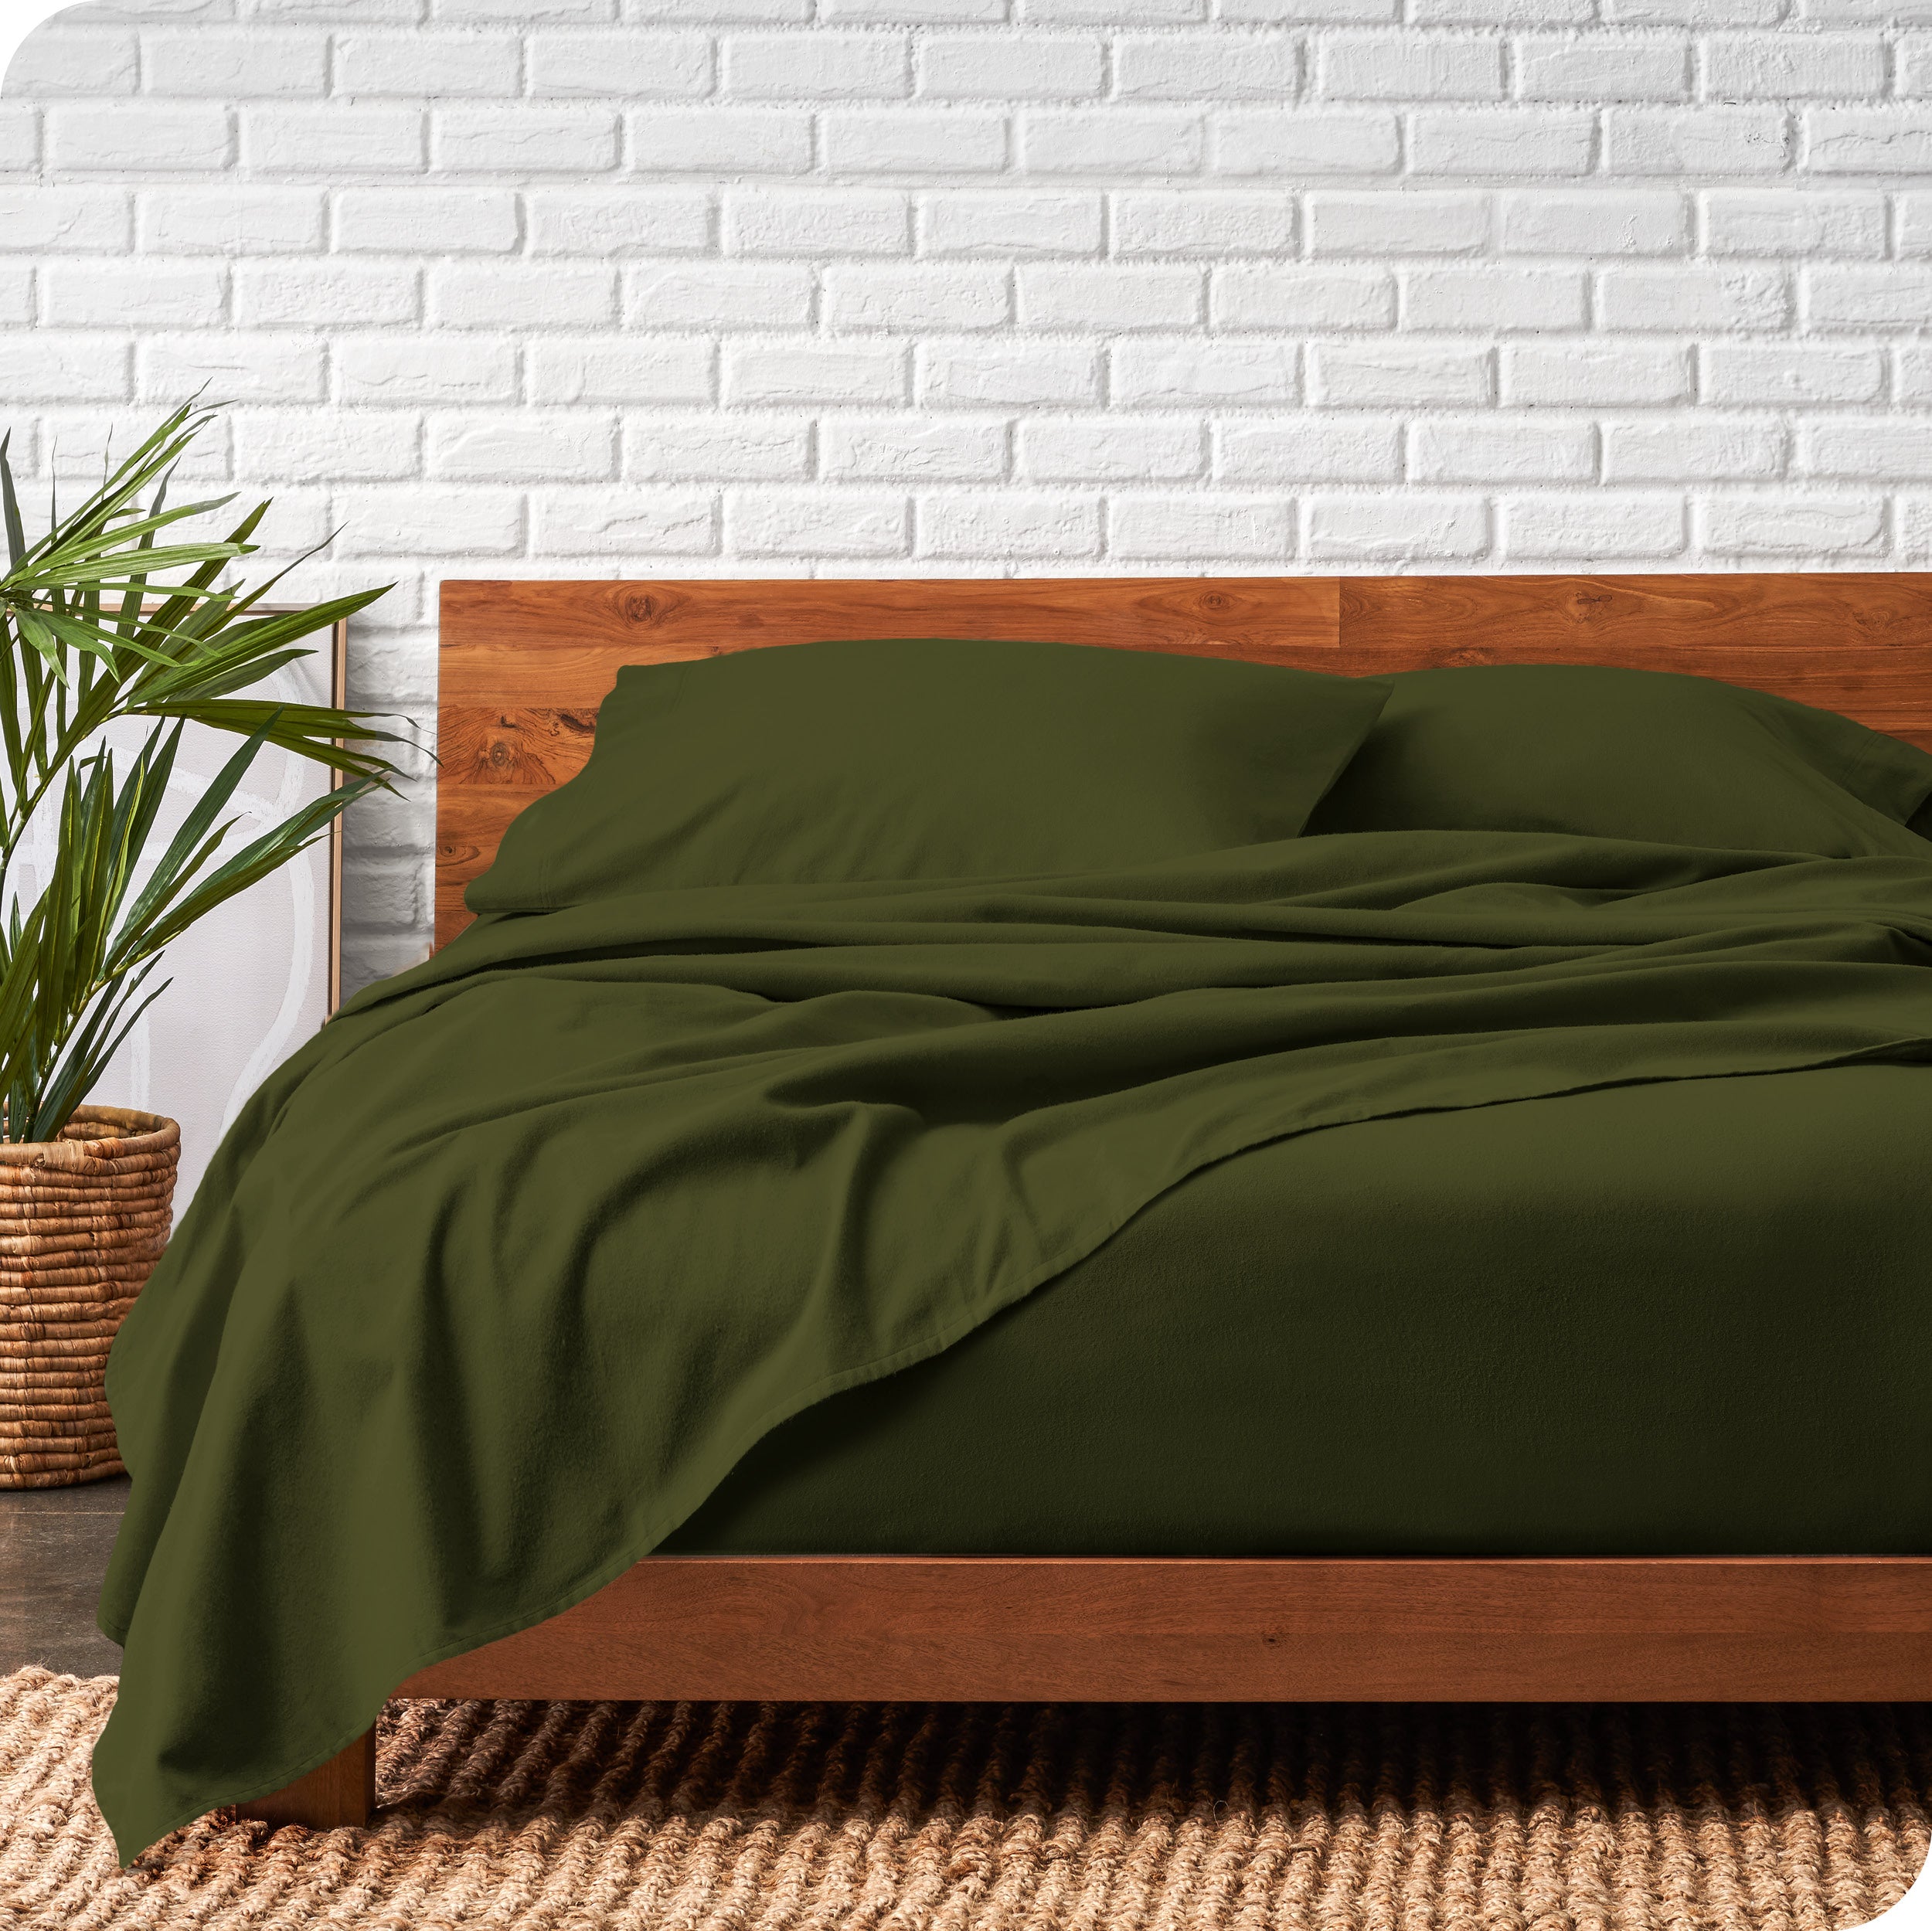 Modern wood bed frame with green organic flannel sheets and pillowcases